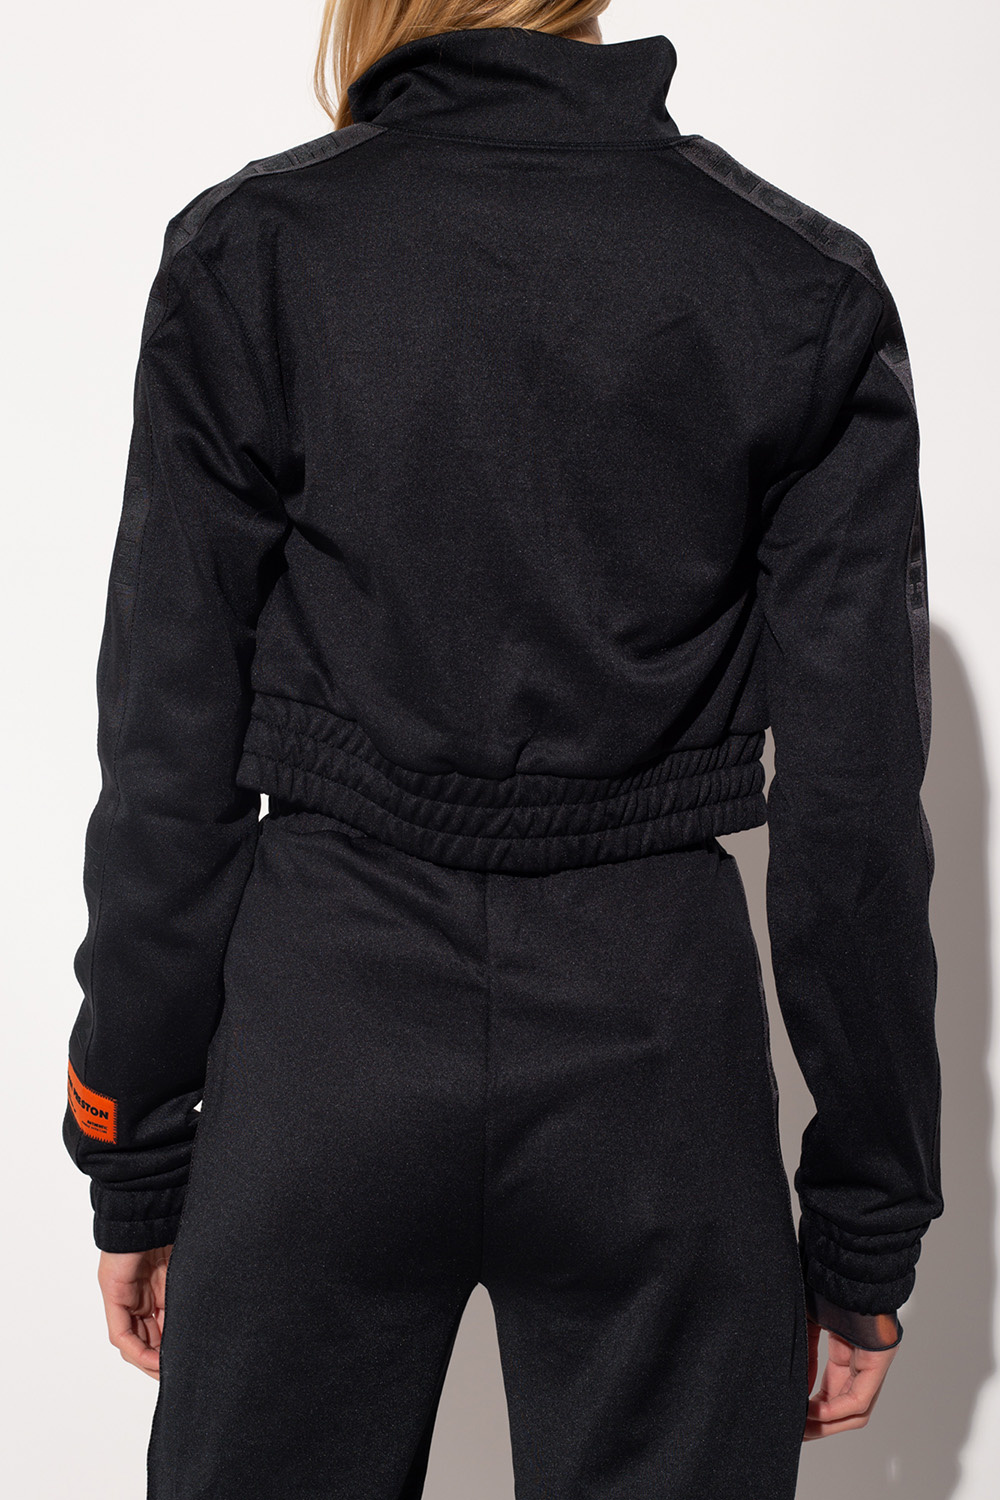 Heron Preston The mens collection includes androgenic shirts